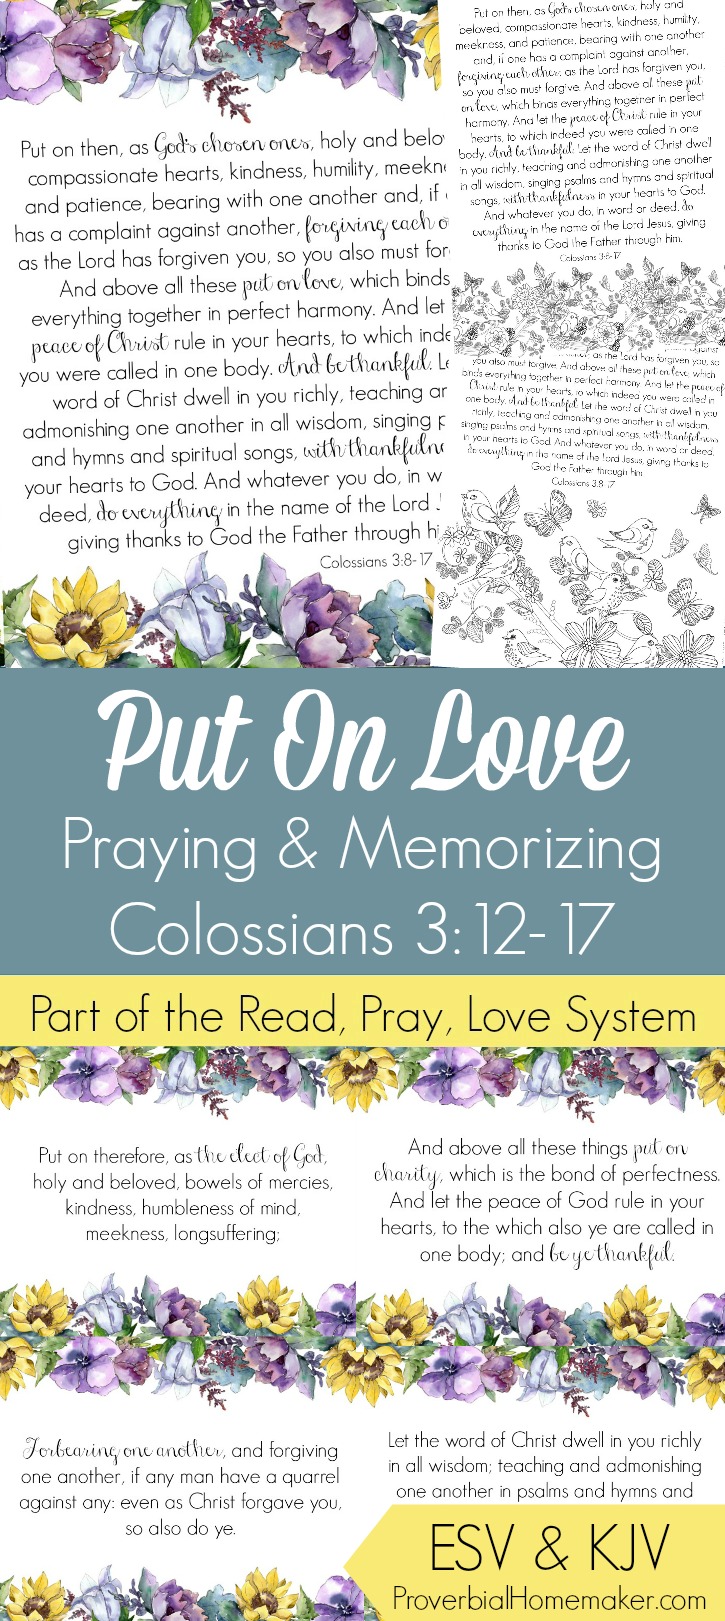 Pray and begin memorizing Colossians 3:12-17 together as a family, all about putting on the love of Christ in all we do! These beautiful scripture art prints, memory verse cards, coloring pages, and prayer prompts are a wonderful way to get started. Part of the Proverbial Homemaker Read, Pray, Love system.